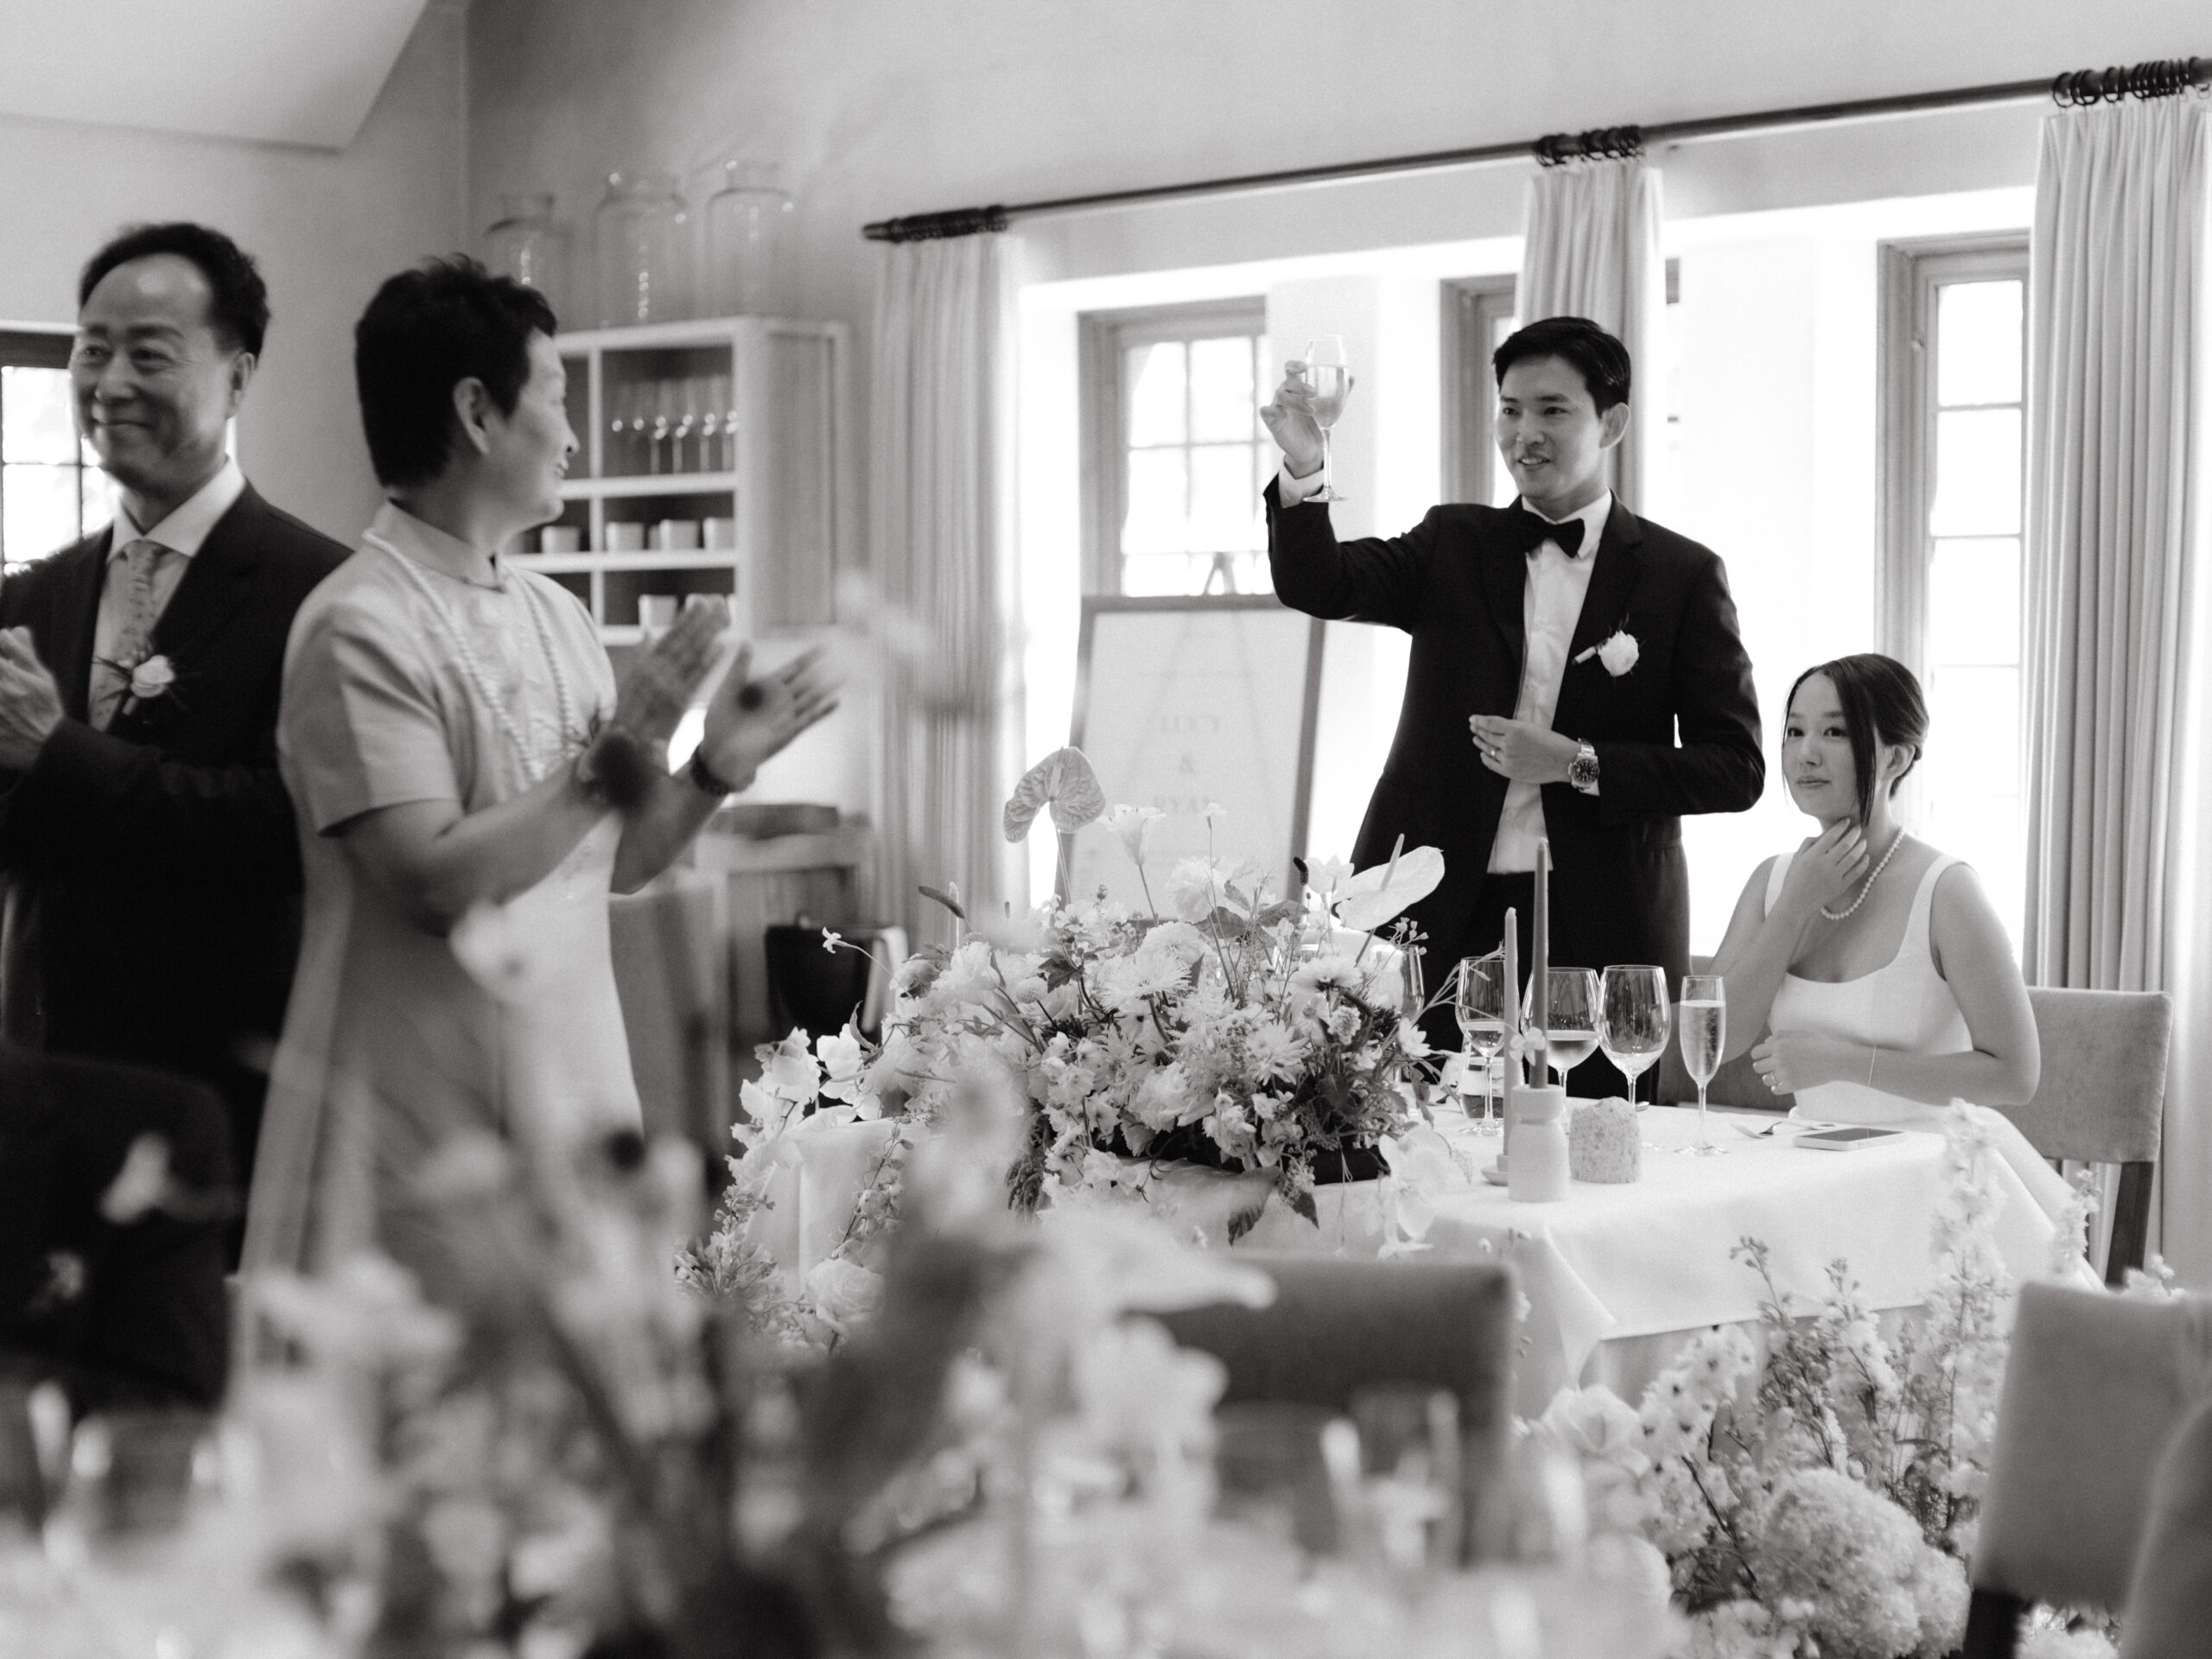 A black and white candid image of the newlyweds giving a toast at their wedding reception, captured by Jenny Fu Studio.